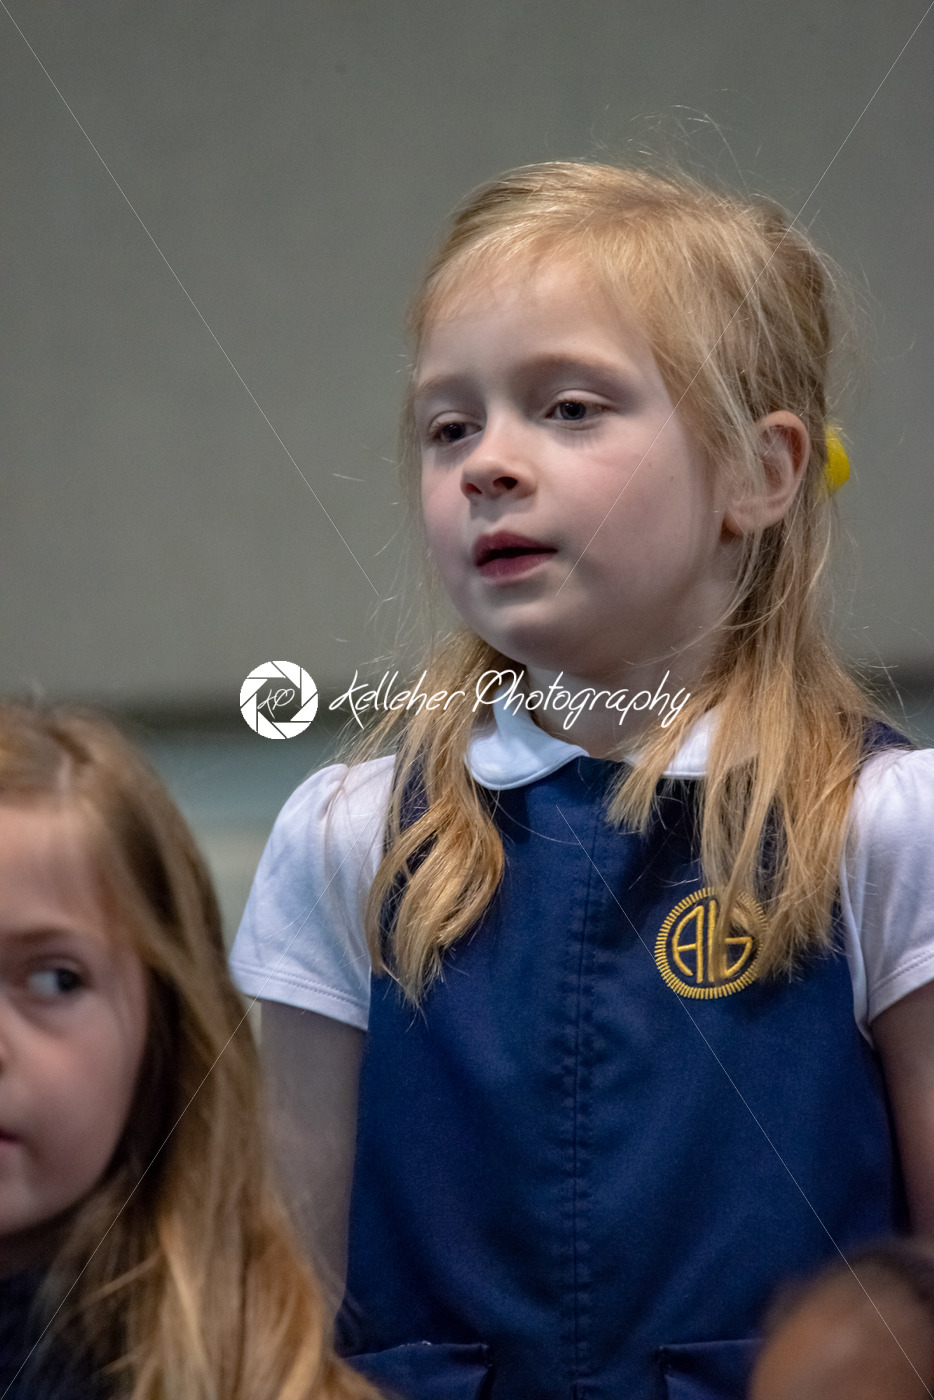 ROSEMONT, PA – MAY 8, 2019: Lower school spring concert at The Agnes Irwin School - Kelleher Photography Store